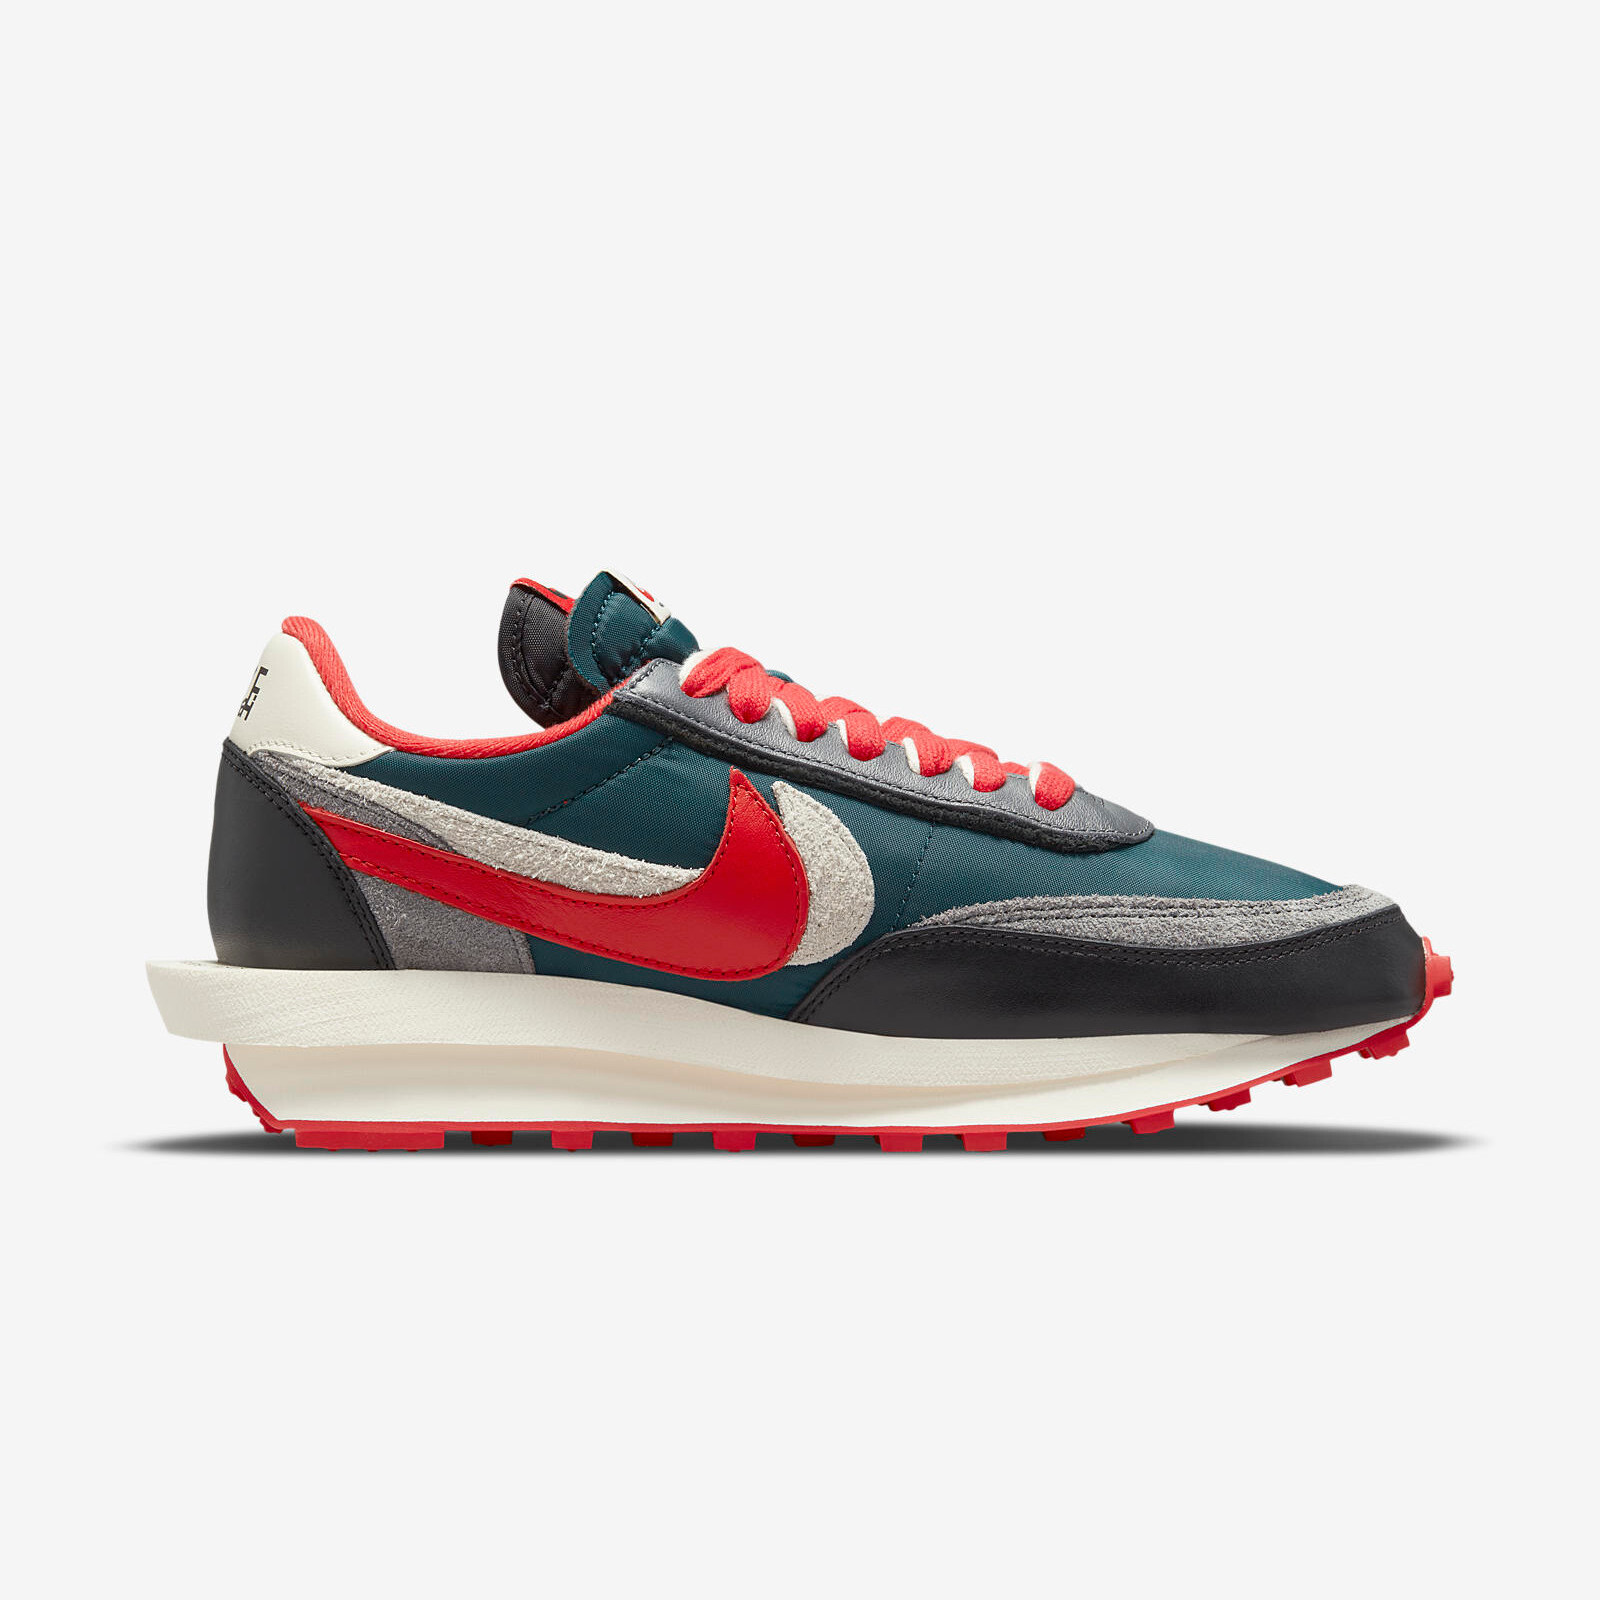 Undercover x Sacai
Nike LDWaffle
Midnight Spruce / Red